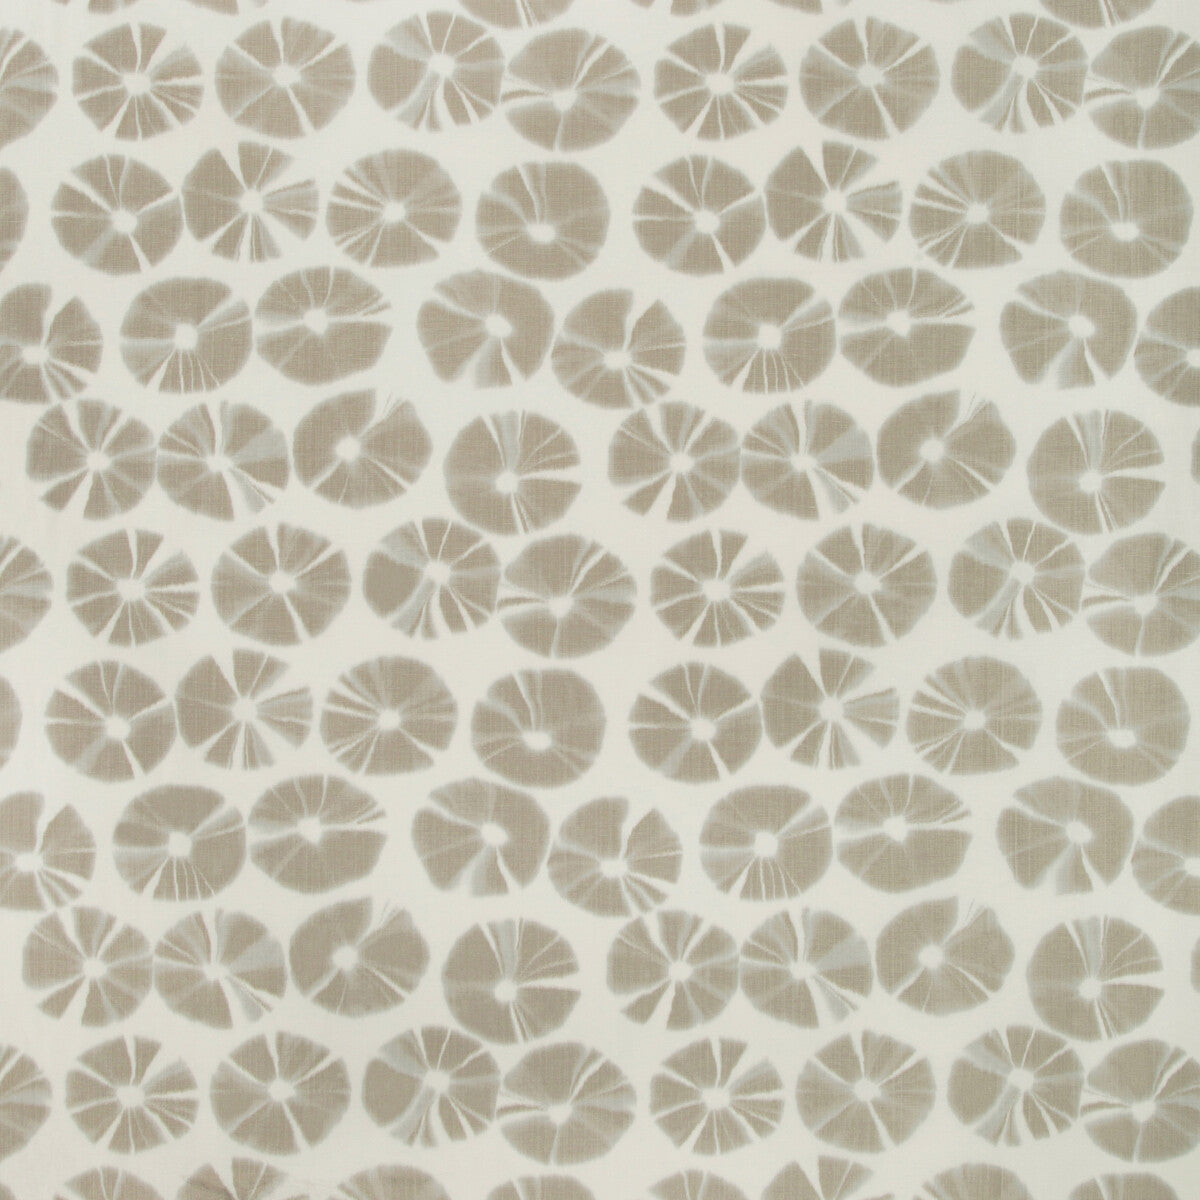 Echino fabric in fawn color - pattern ECHINO.16.0 - by Kravet Couture in the Terrae Prints collection